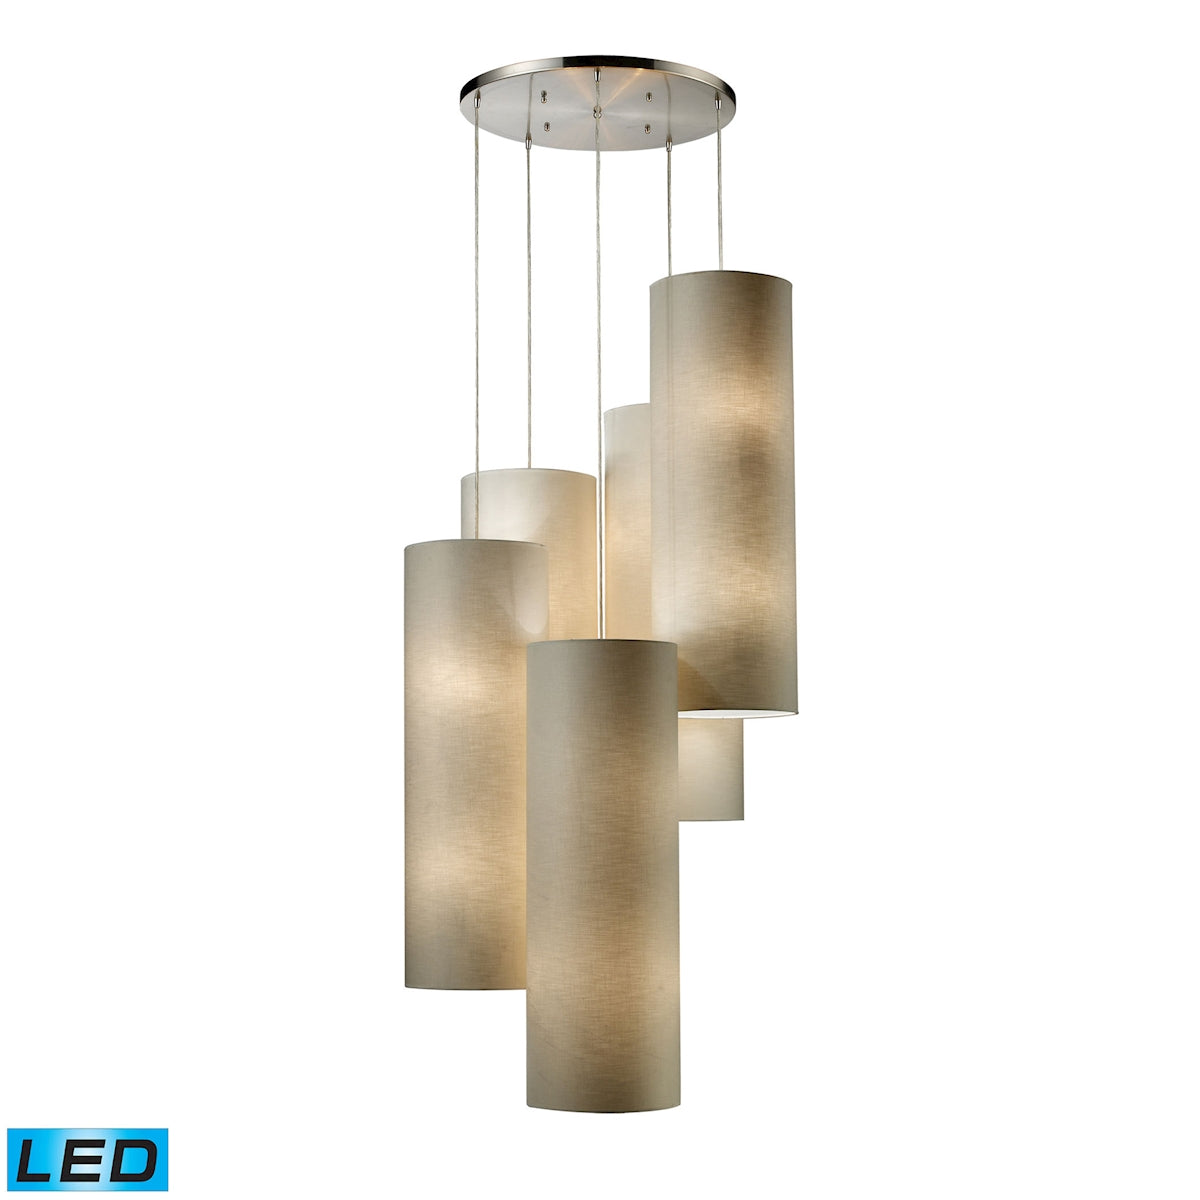 ELK Lighting 20160/20R-LED Fabric Cylinders 20-Light Chandelier in Satin Nickel with 5 Shades - Includes LED Bulbs